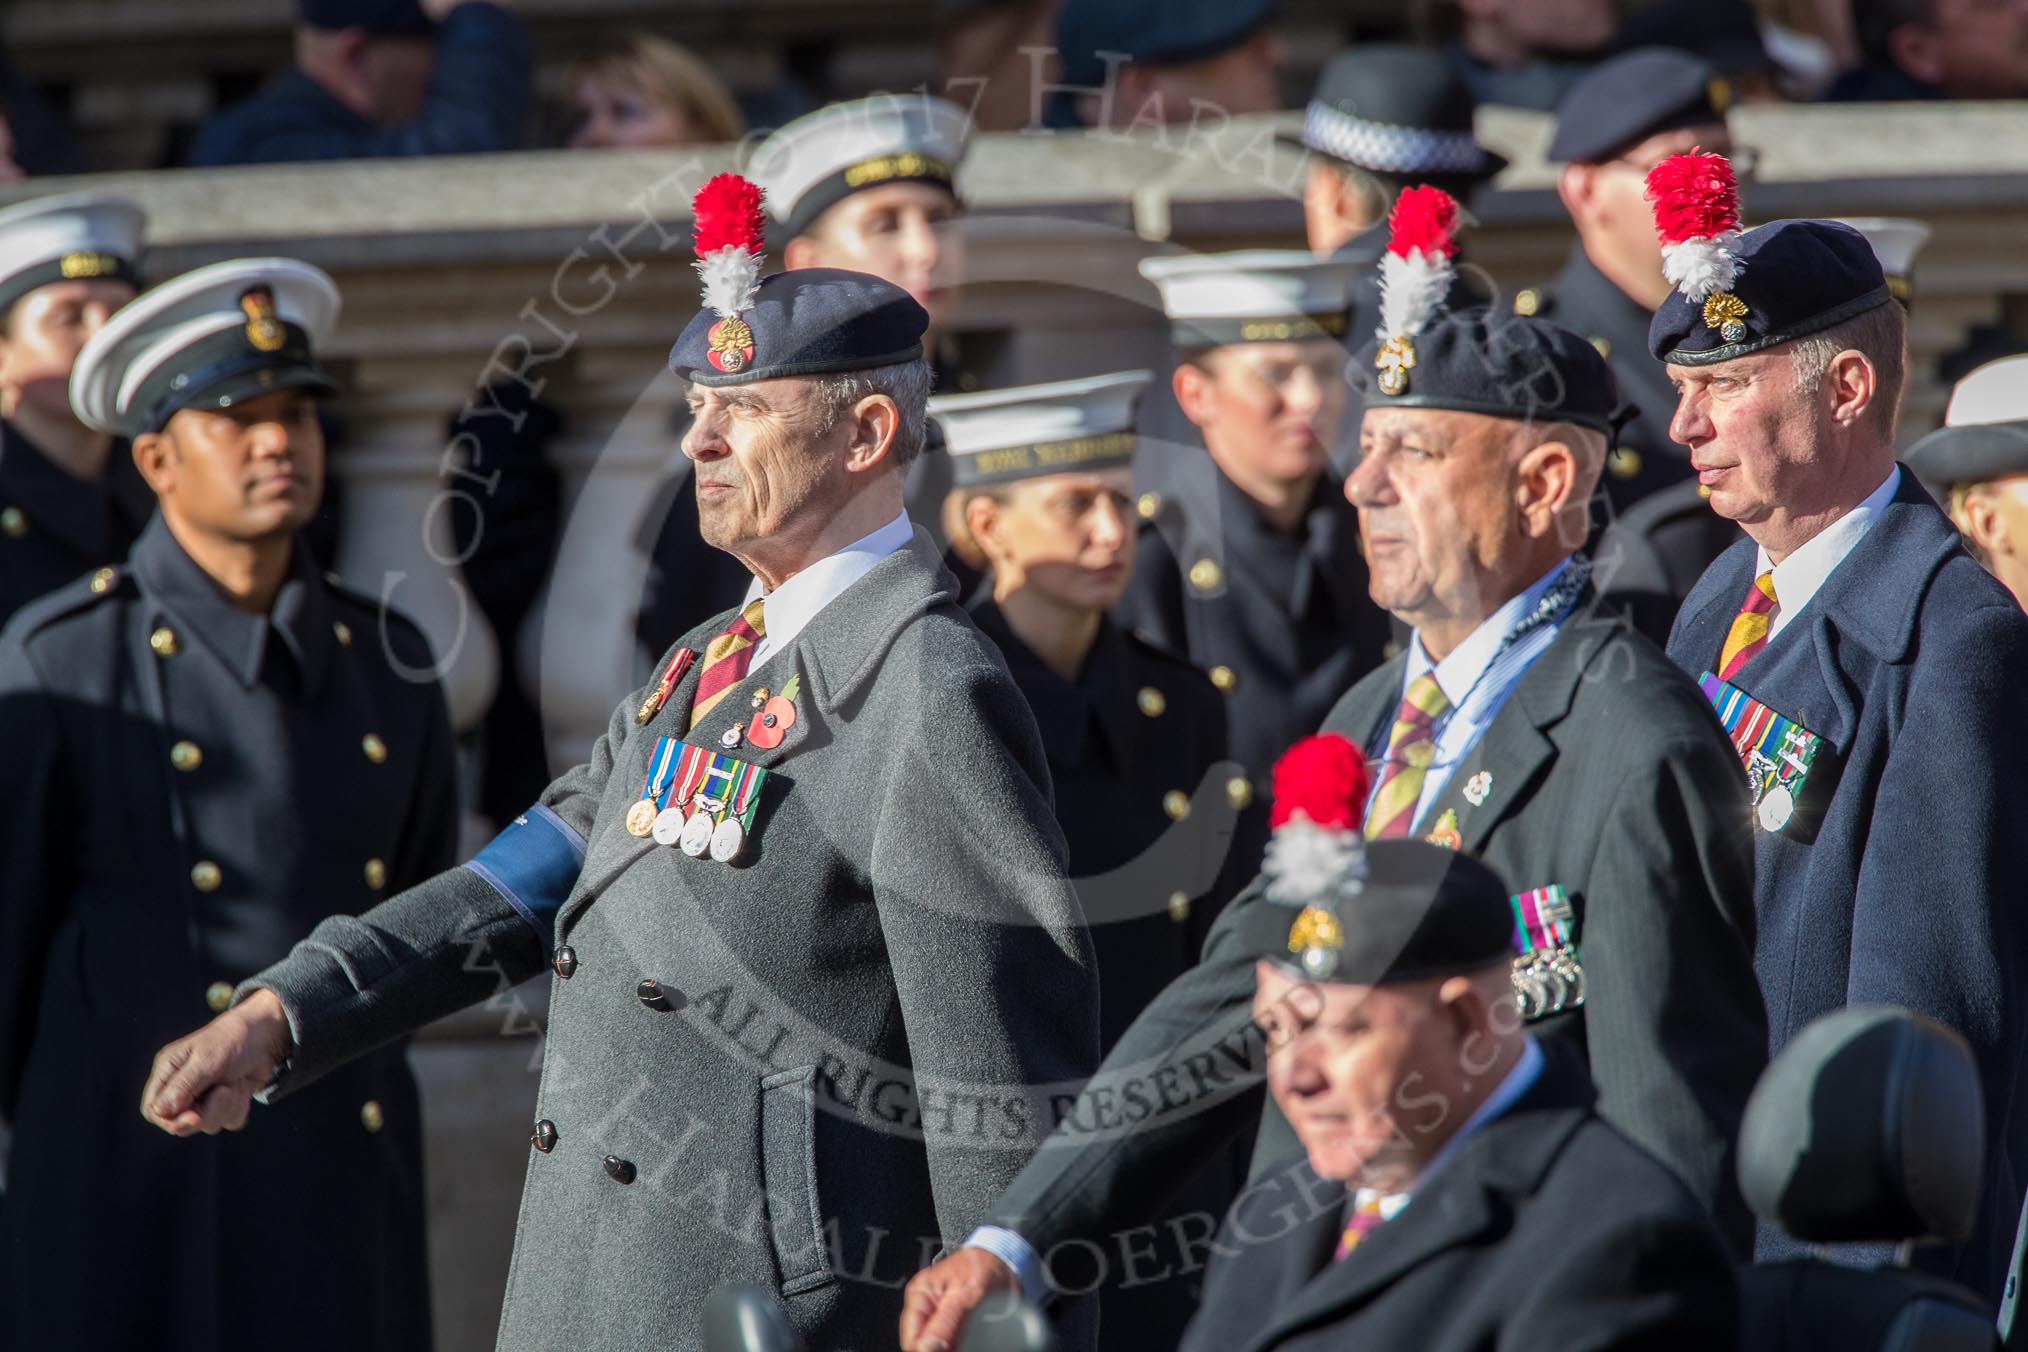 The Northumberland Fusiliers All Ranks Club (Group A34, 41 members) during the Royal British Legion March Past on Remembrance Sunday at the Cenotaph, Whitehall, Westminster, London, 11 November 2018, 12:02.